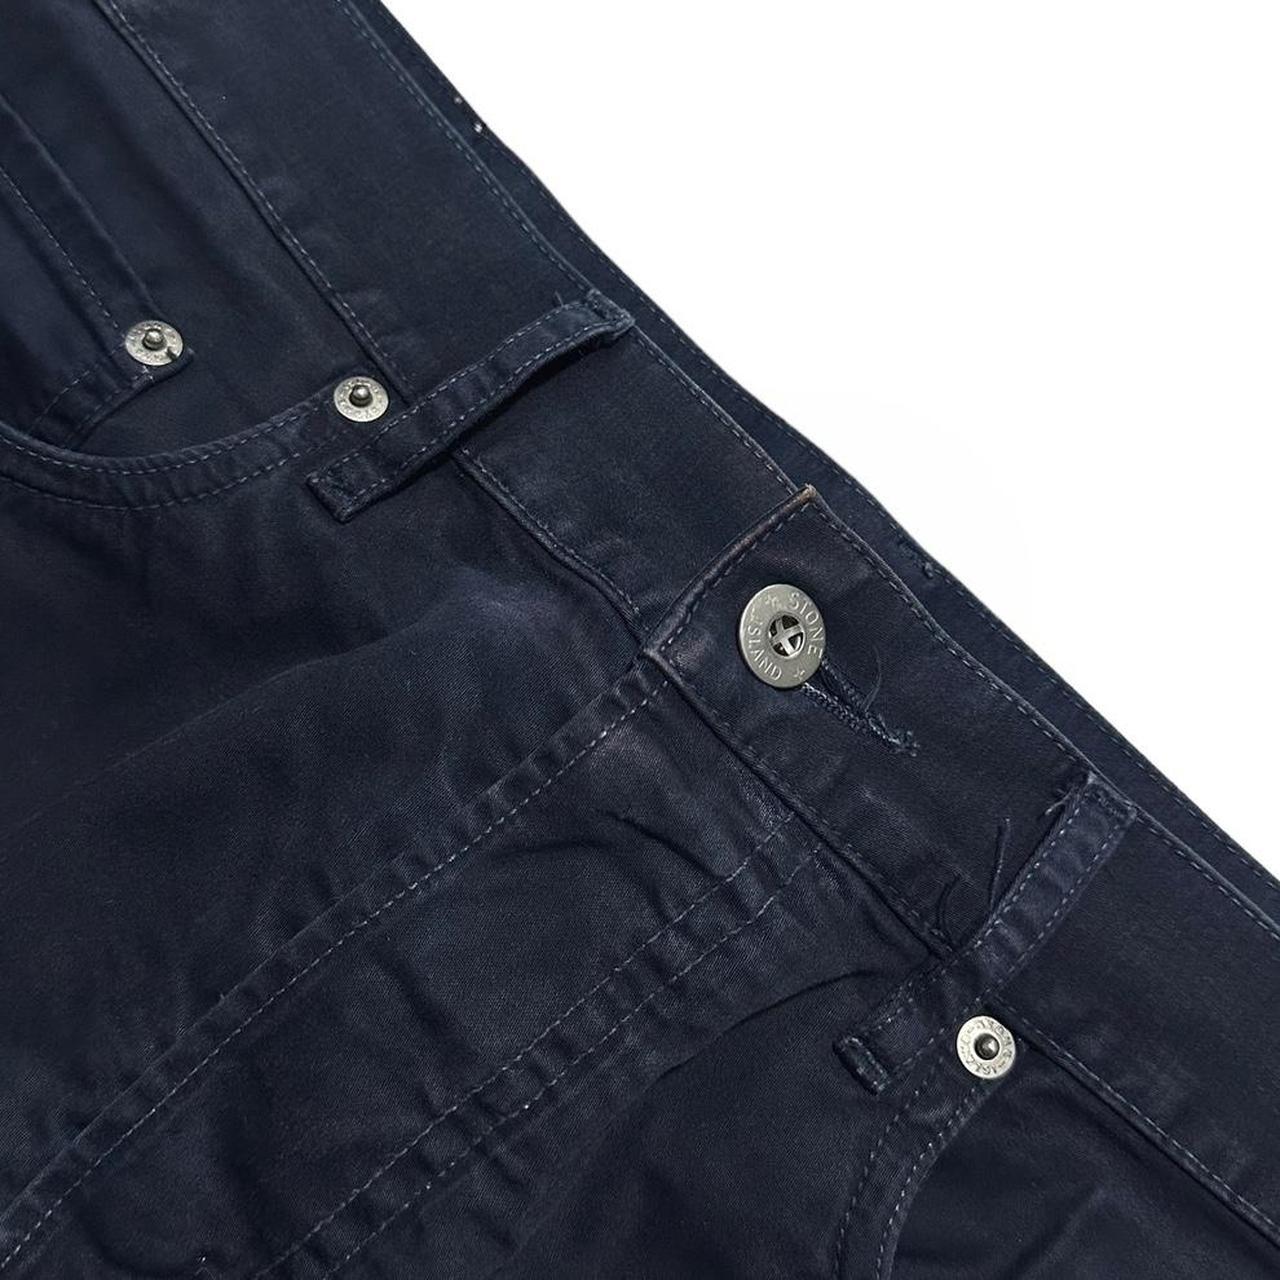 Stone Island Blue Chinos - Known Source